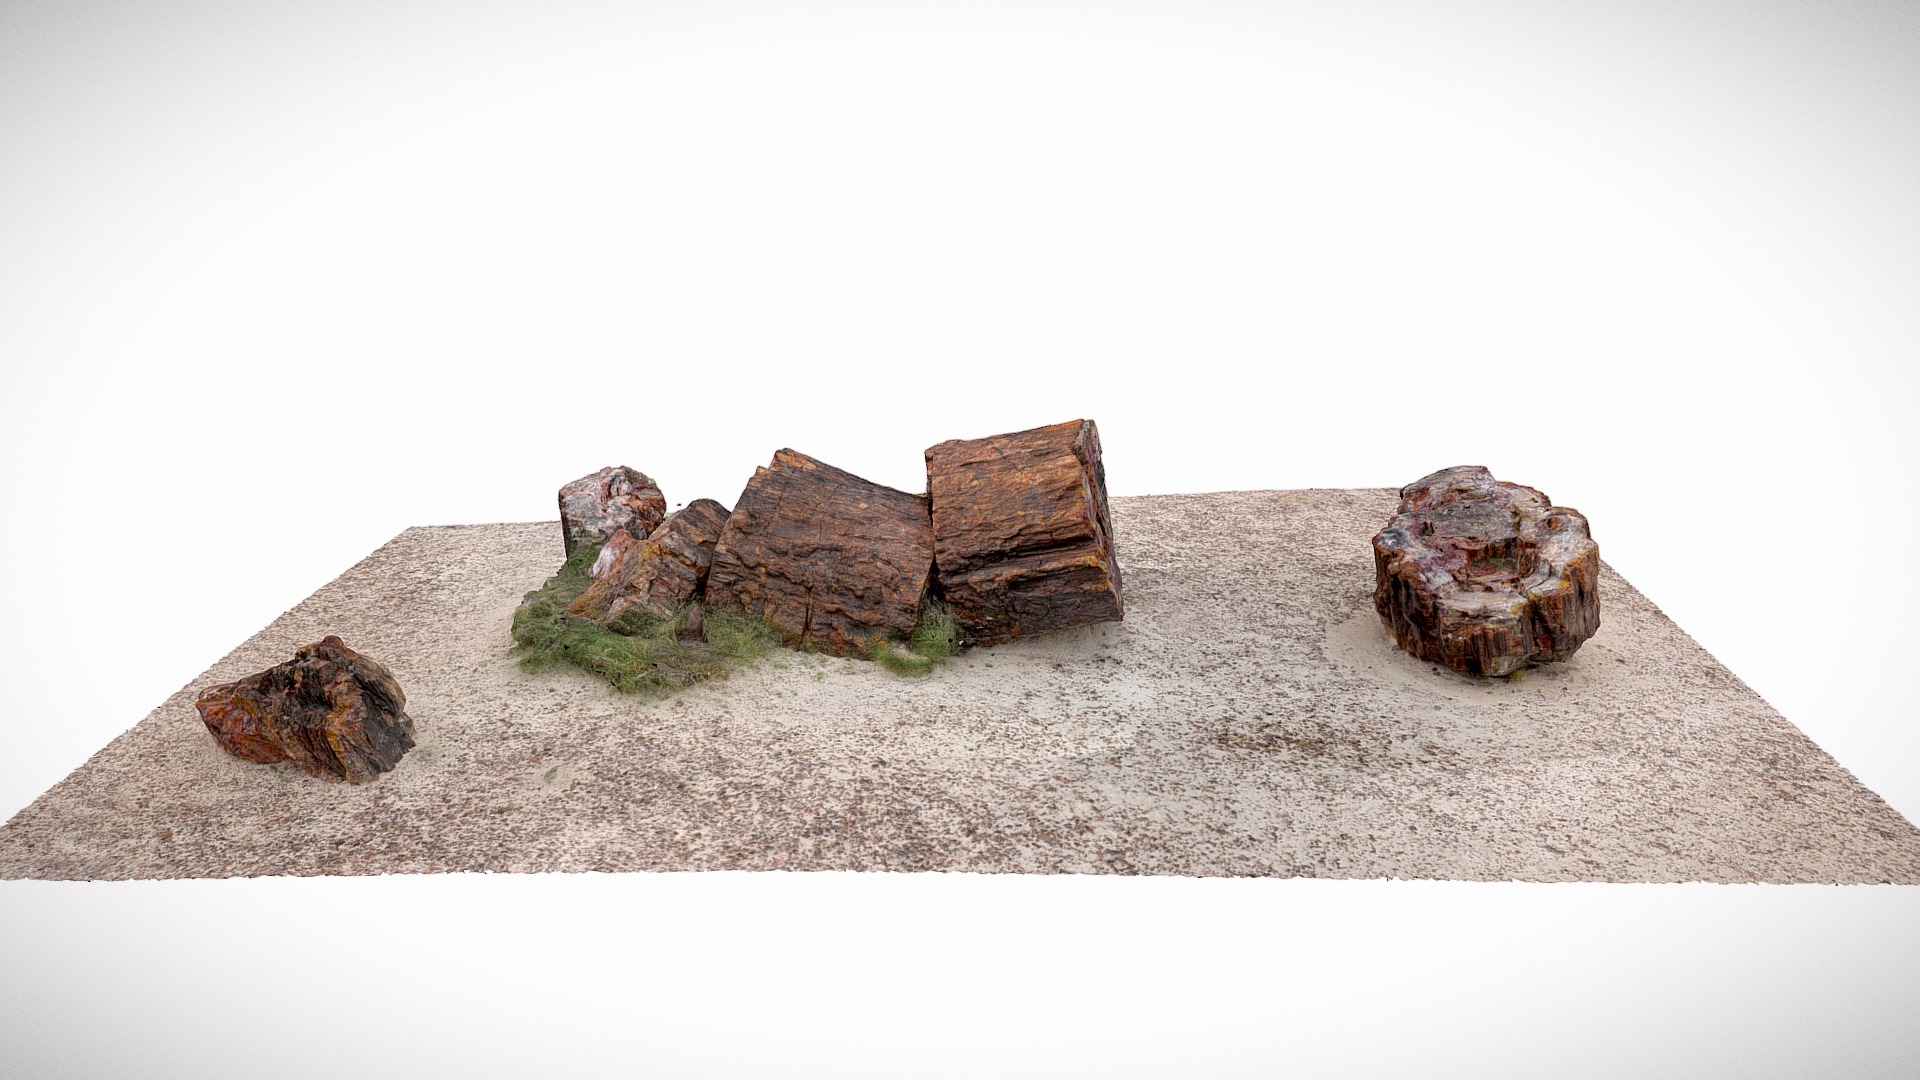 3D model Petrified Forest National Park Petrified Logs - This is a 3D model of the Petrified Forest National Park Petrified Logs. The 3D model is about a group of rocks.